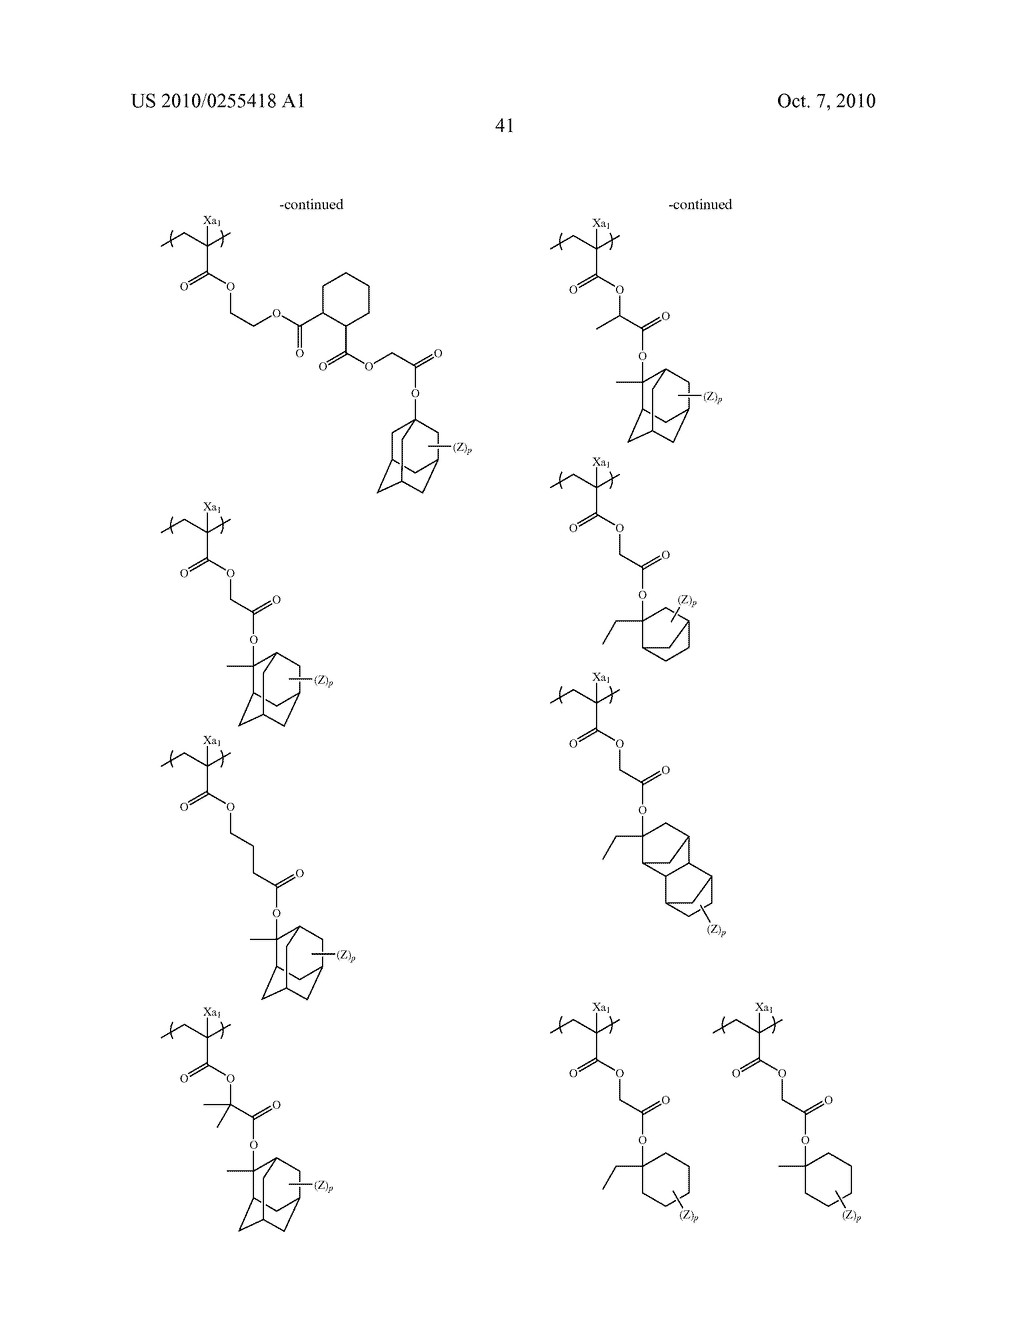 ACTINIC-RAY- OR RADIATION-SENSITIVE RESIN COMPOSITION AND METHOD OF FORMING PATTERN THEREWITH - diagram, schematic, and image 45